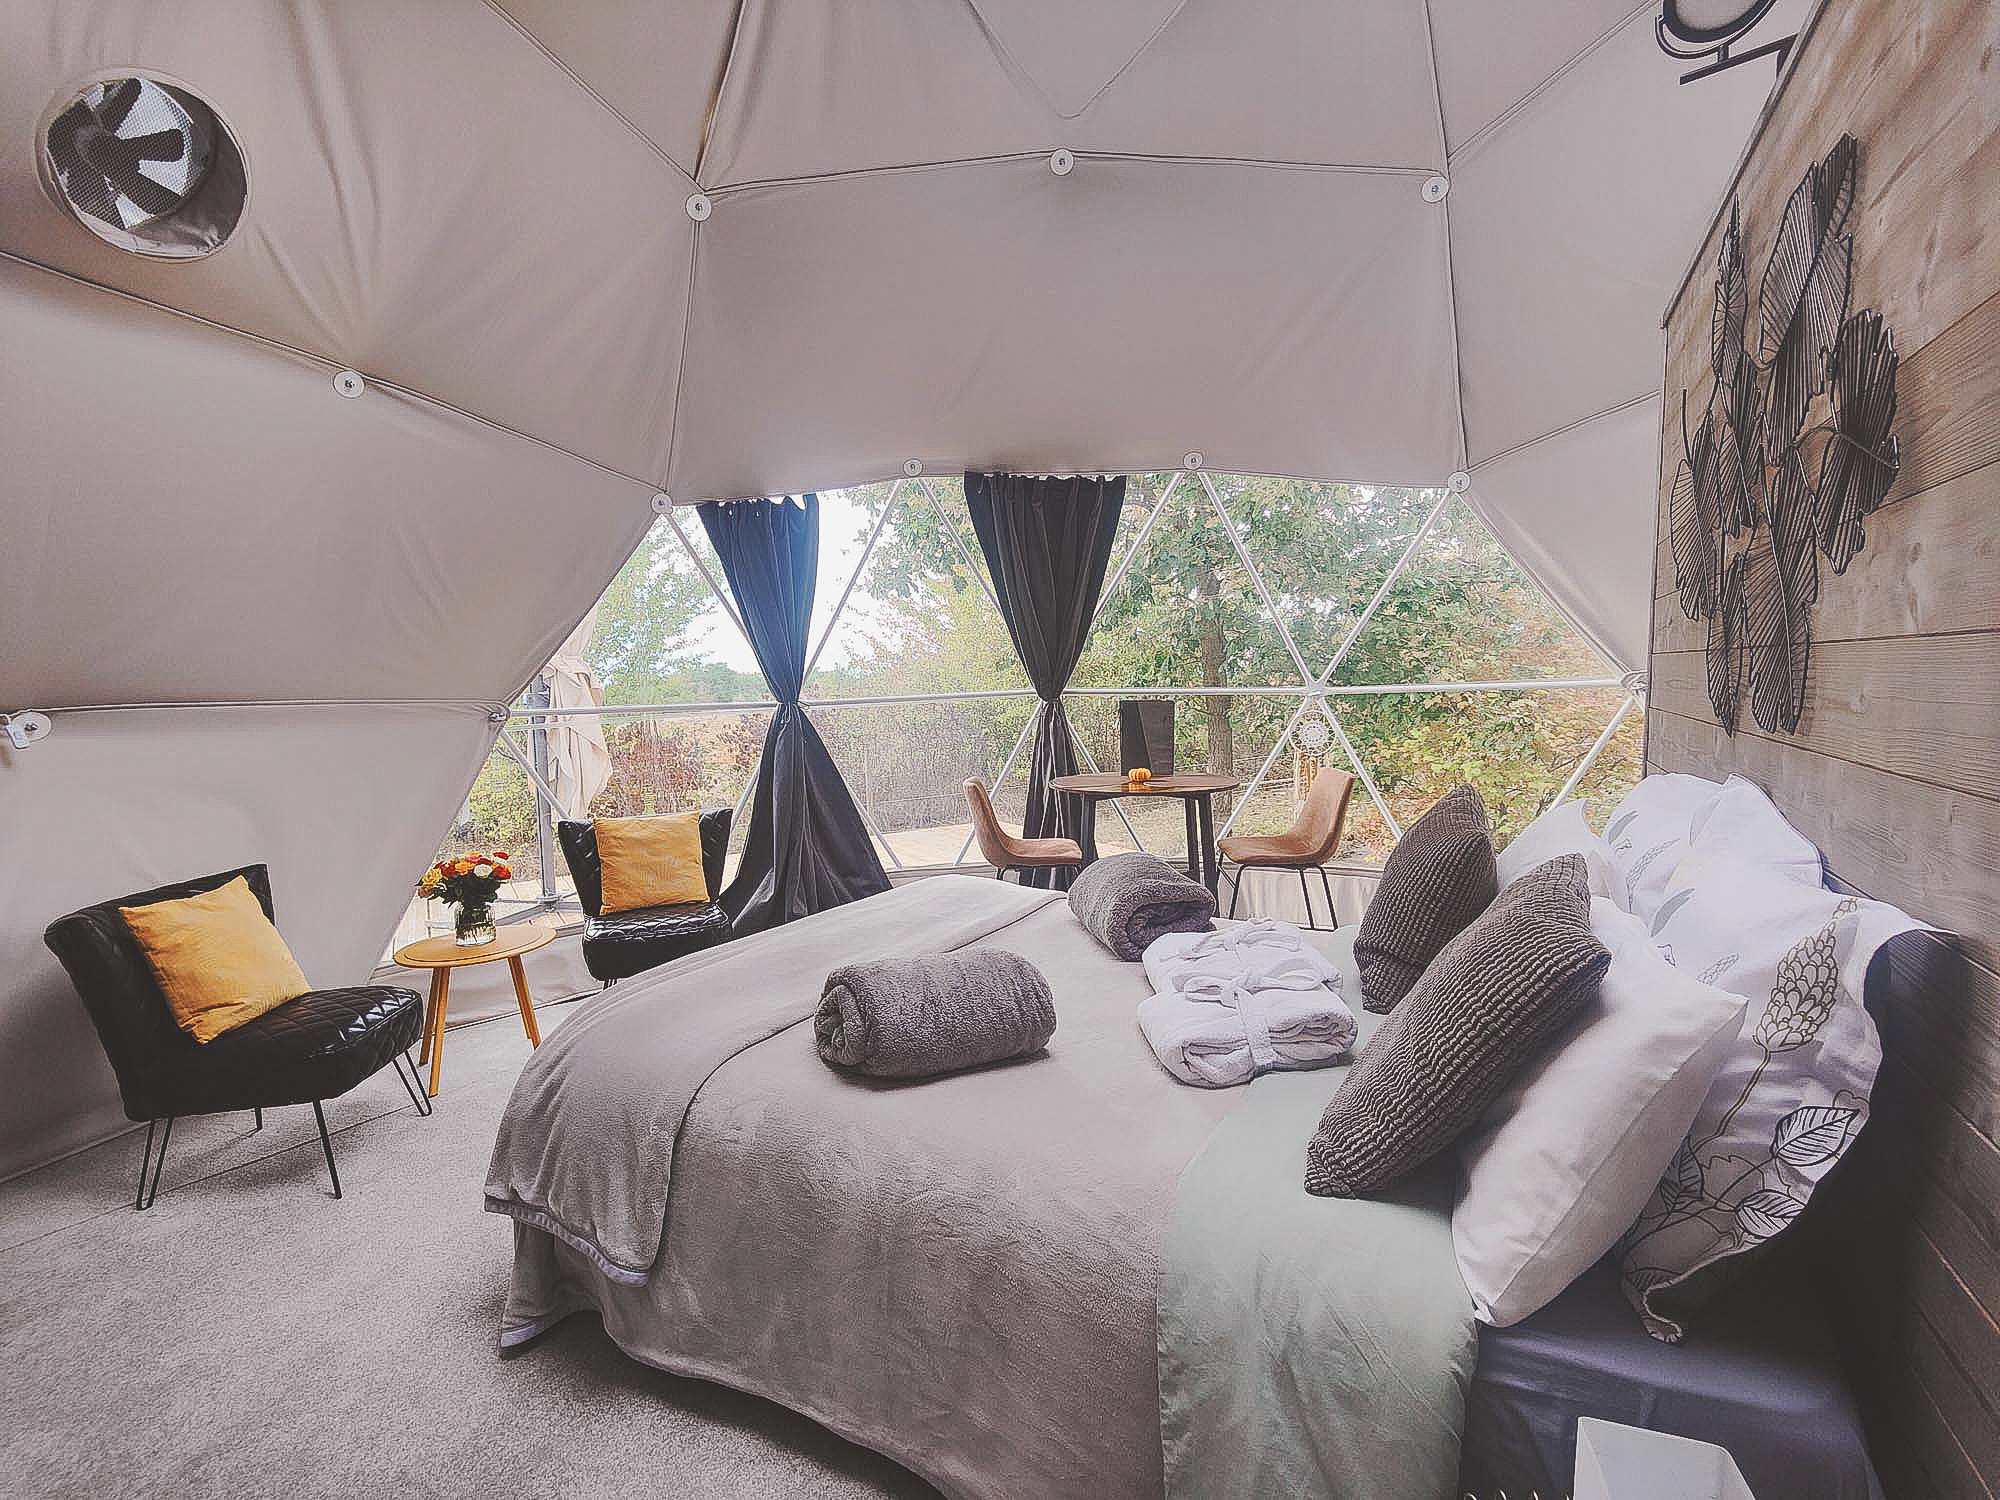 inside of geodesic dome with four armchairs, a bed and view through window